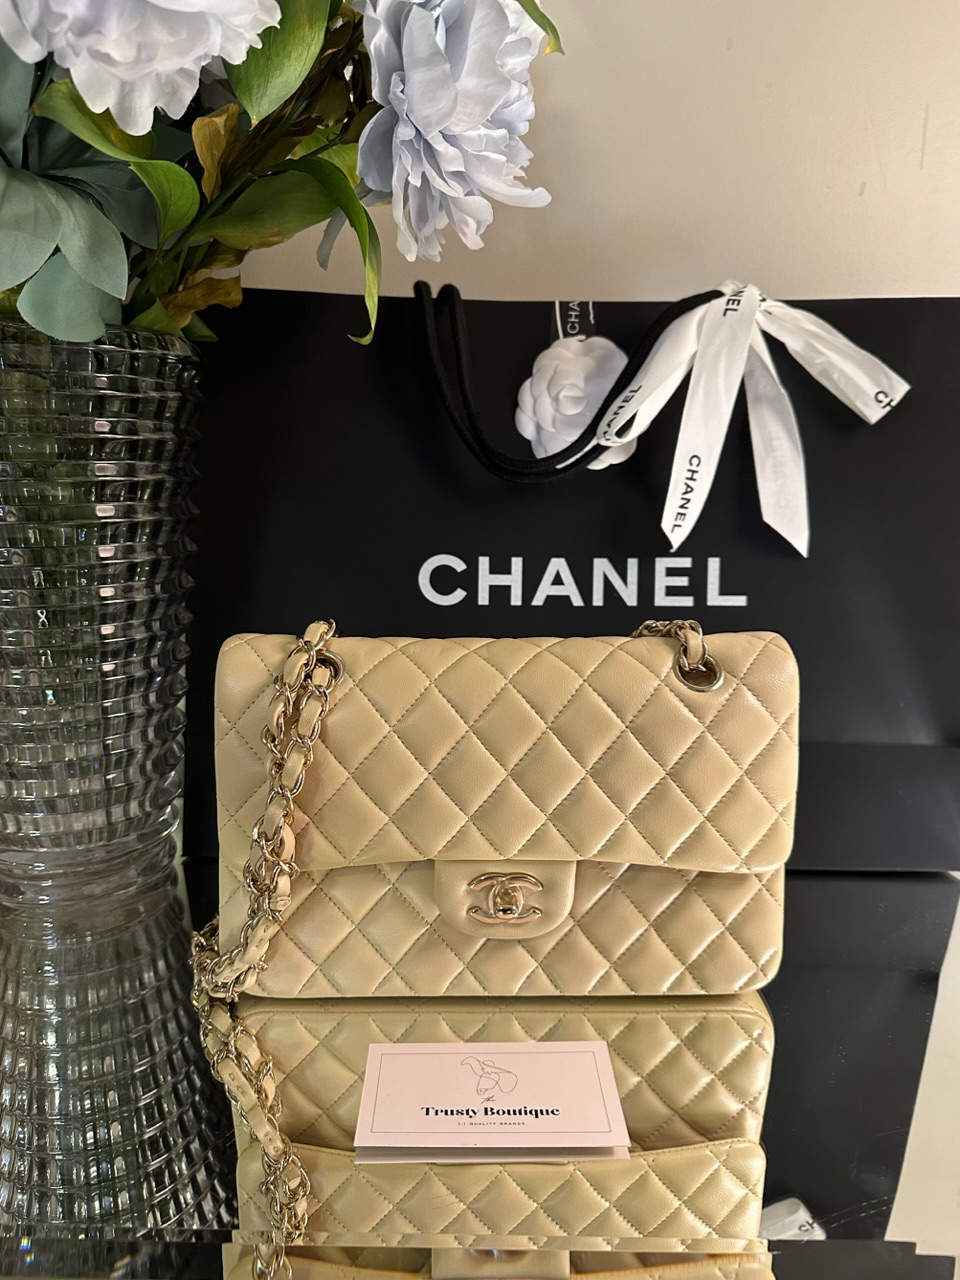 2002 Vintage Chanel Coco Handle Small Light Beige Lambskin – Adore Adored